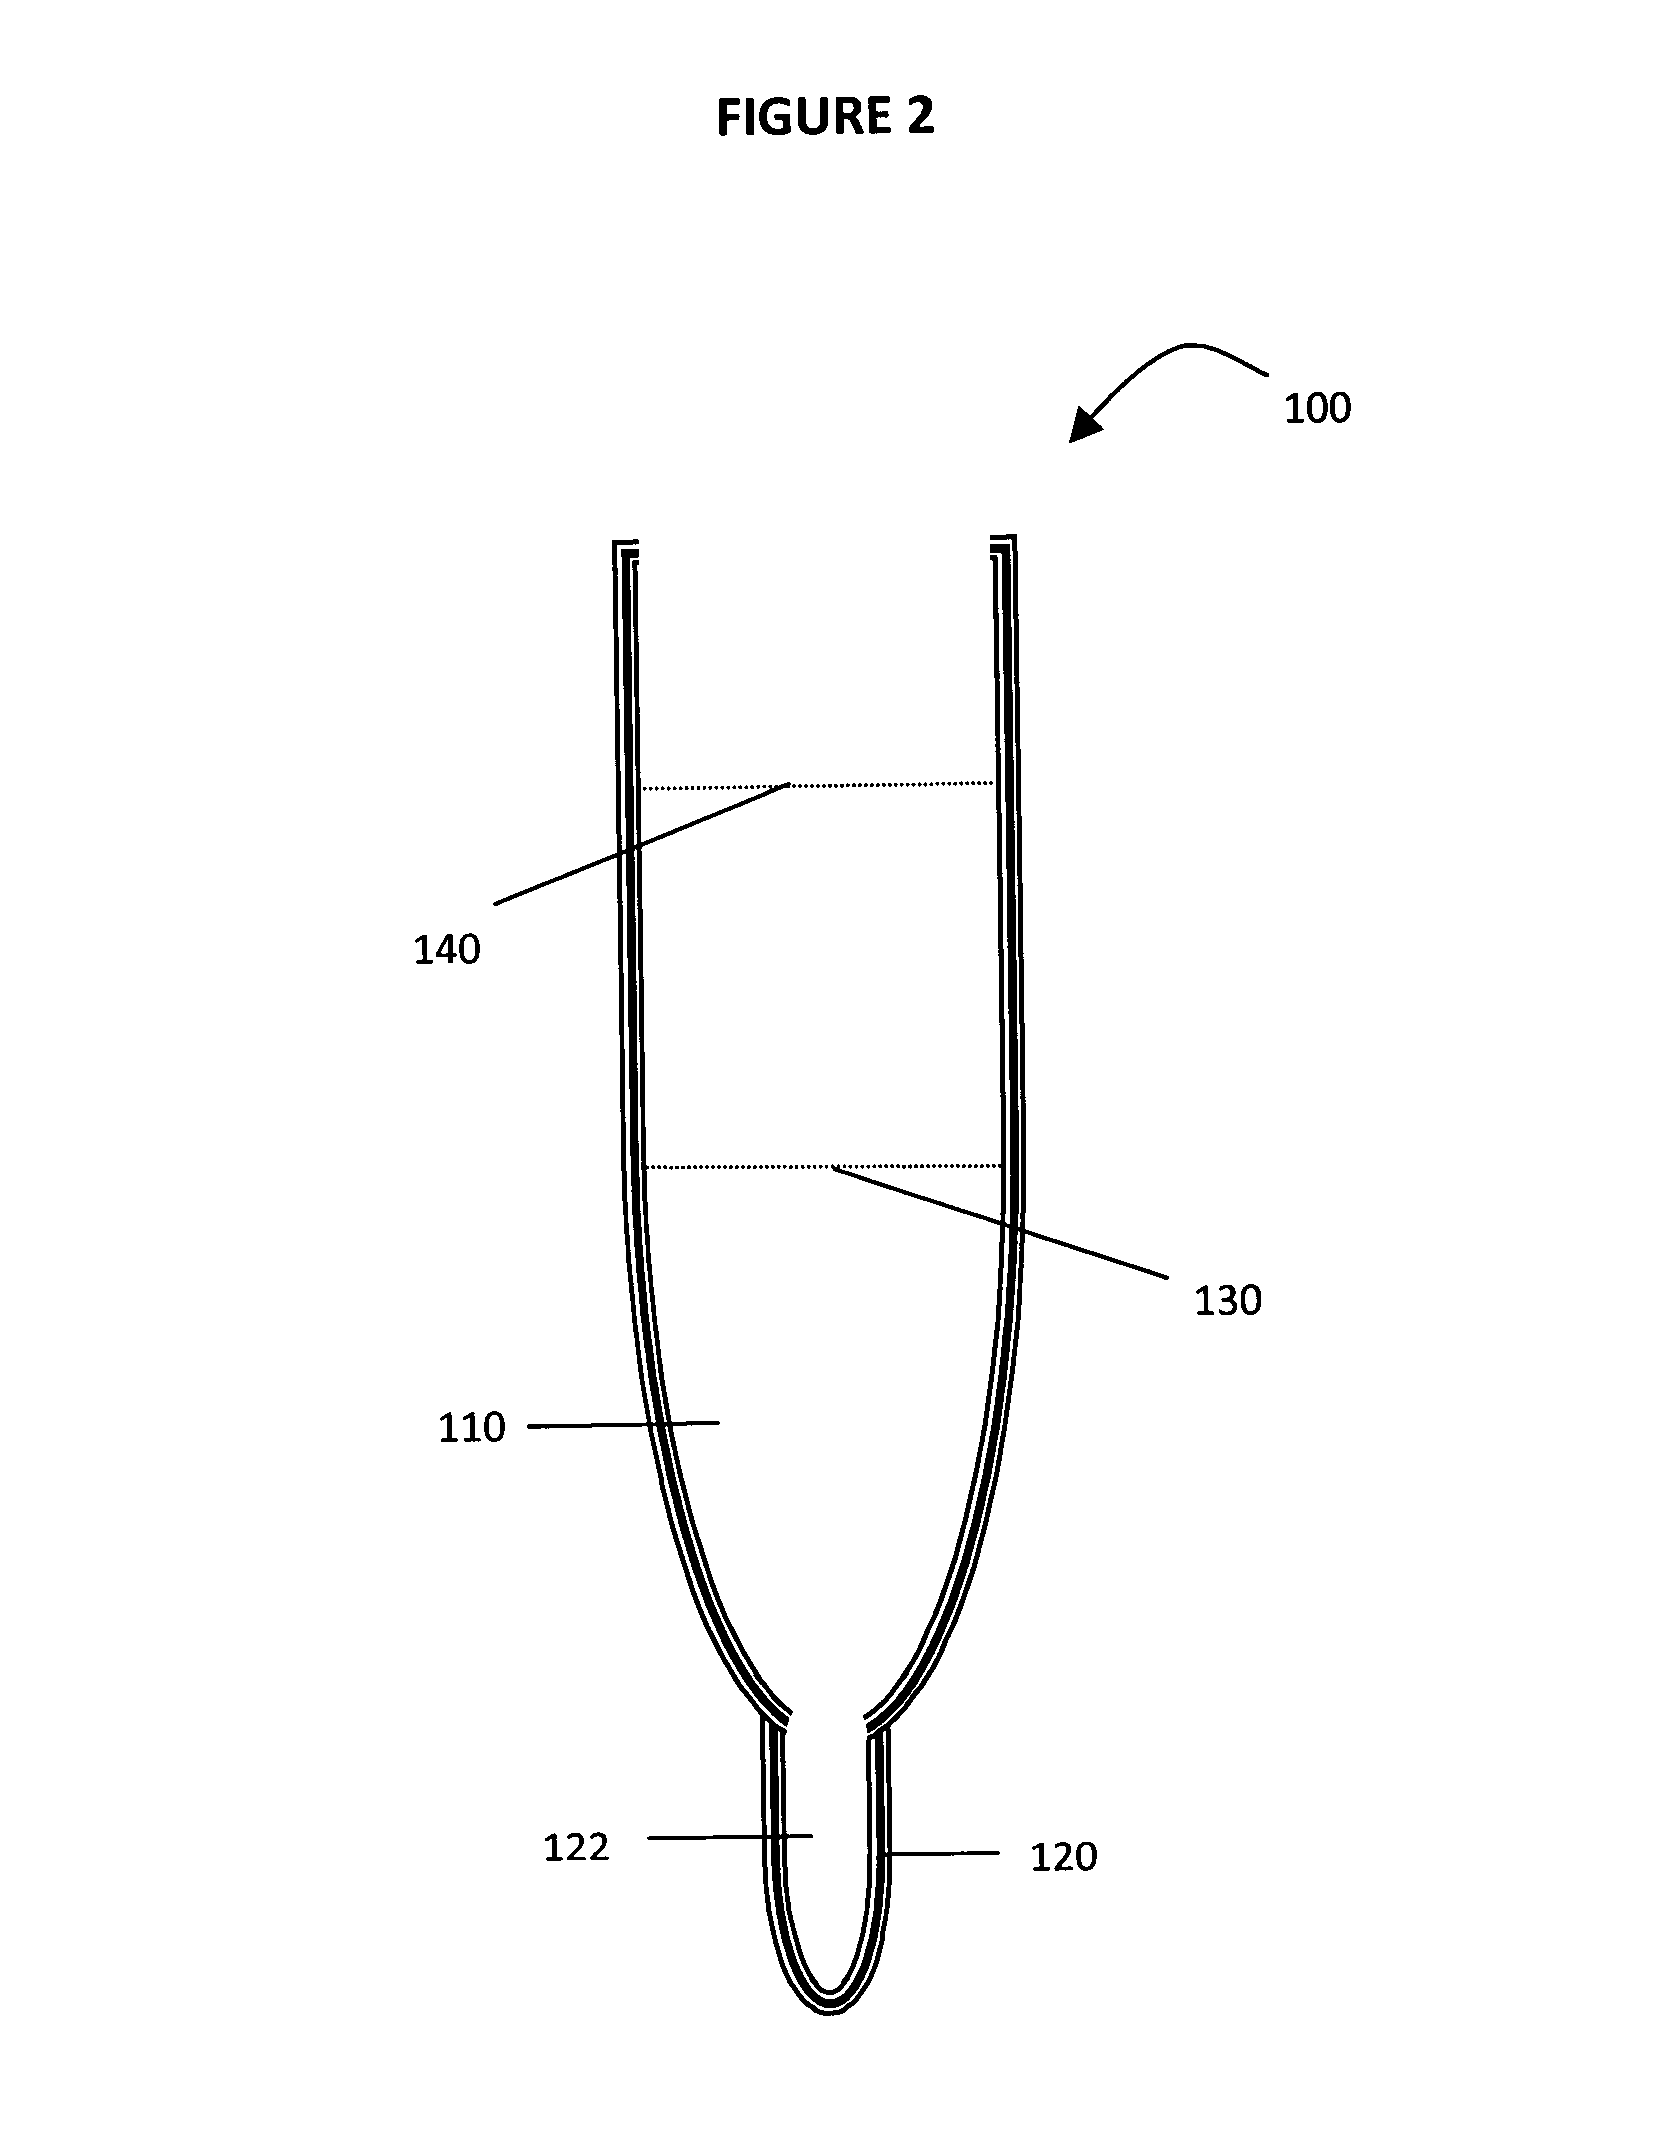 Systems and methods for preparing samples for chemical analysis